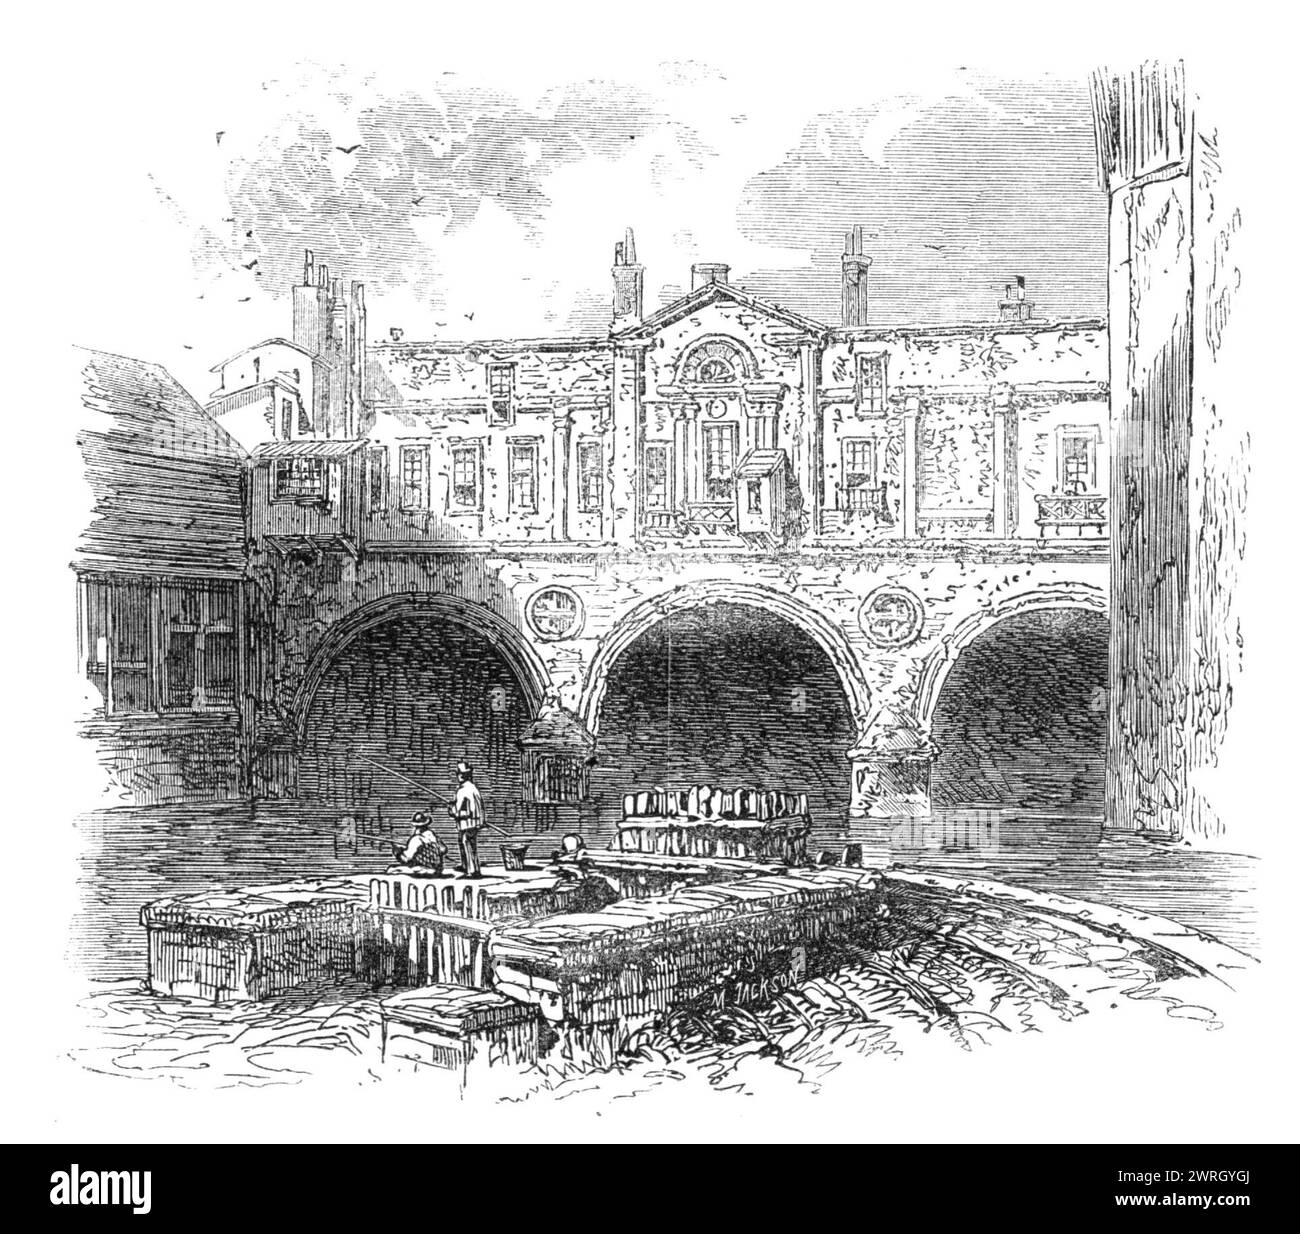 The British Association at Bath: Pulteney-bridge, 1864. 'This remarkable bridge, built in 1770, is named from its giving access to Pulteney-street and the buildings which were just then commenced in Bathwick parish. From the parallel lines of houses which are built on either side of it, and the uninterrupted level of the streets which it connects, a stranger would pass along Bridge-street unconscious of his crossing the Avon which flows beneath him. It is from below that the character of the bridge - as in our Illustration - is seen to advantage. It may be styled the Rialto of Bath, and has a Stock Photo